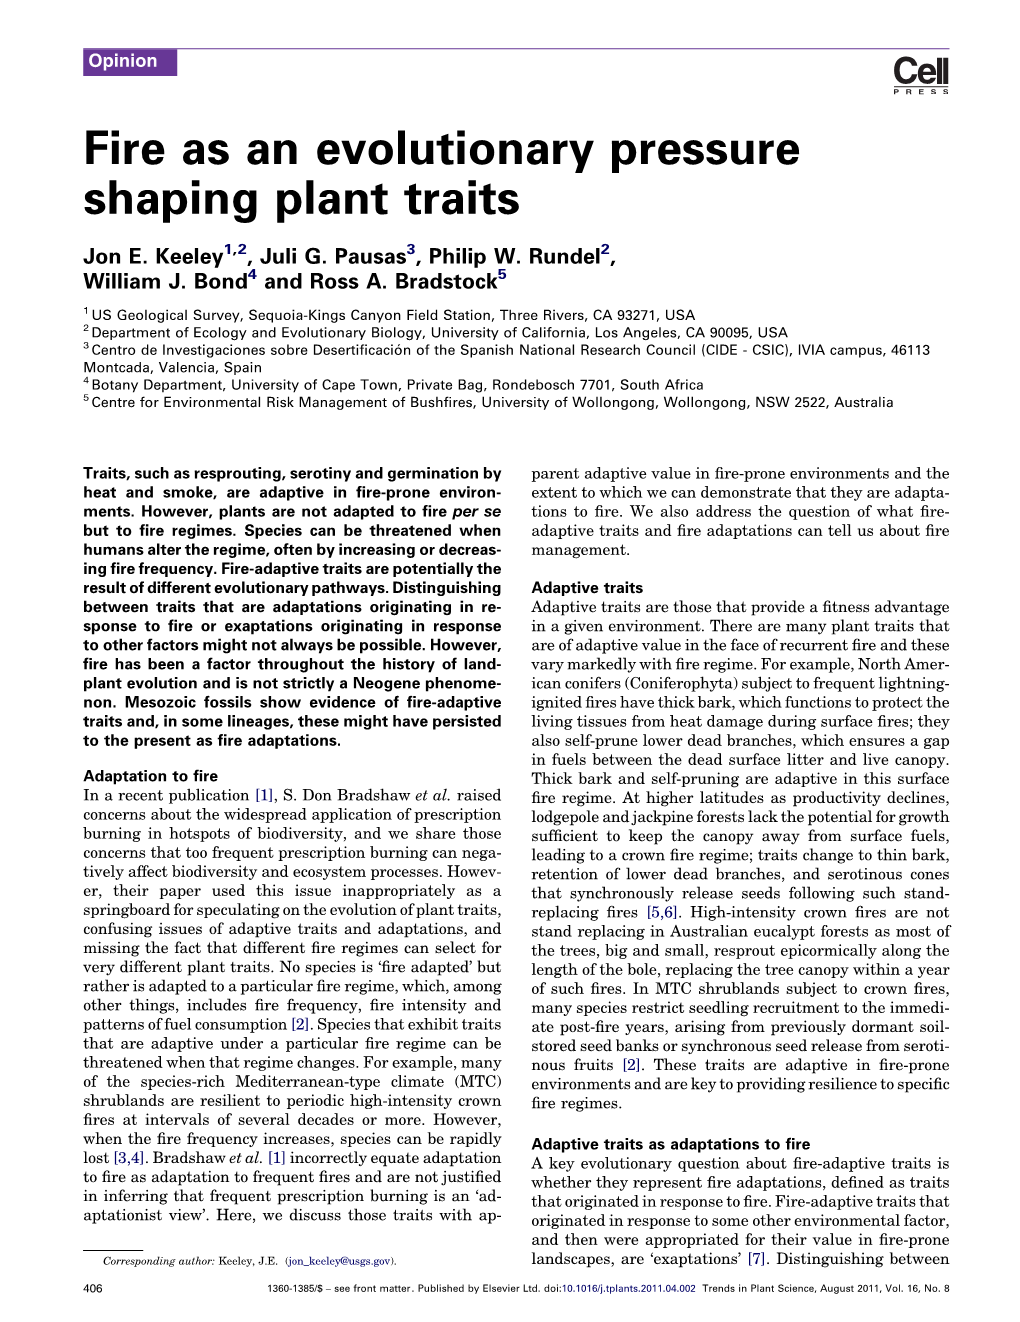 Fire As an Evolutionary Pressure Shaping Plant Traits